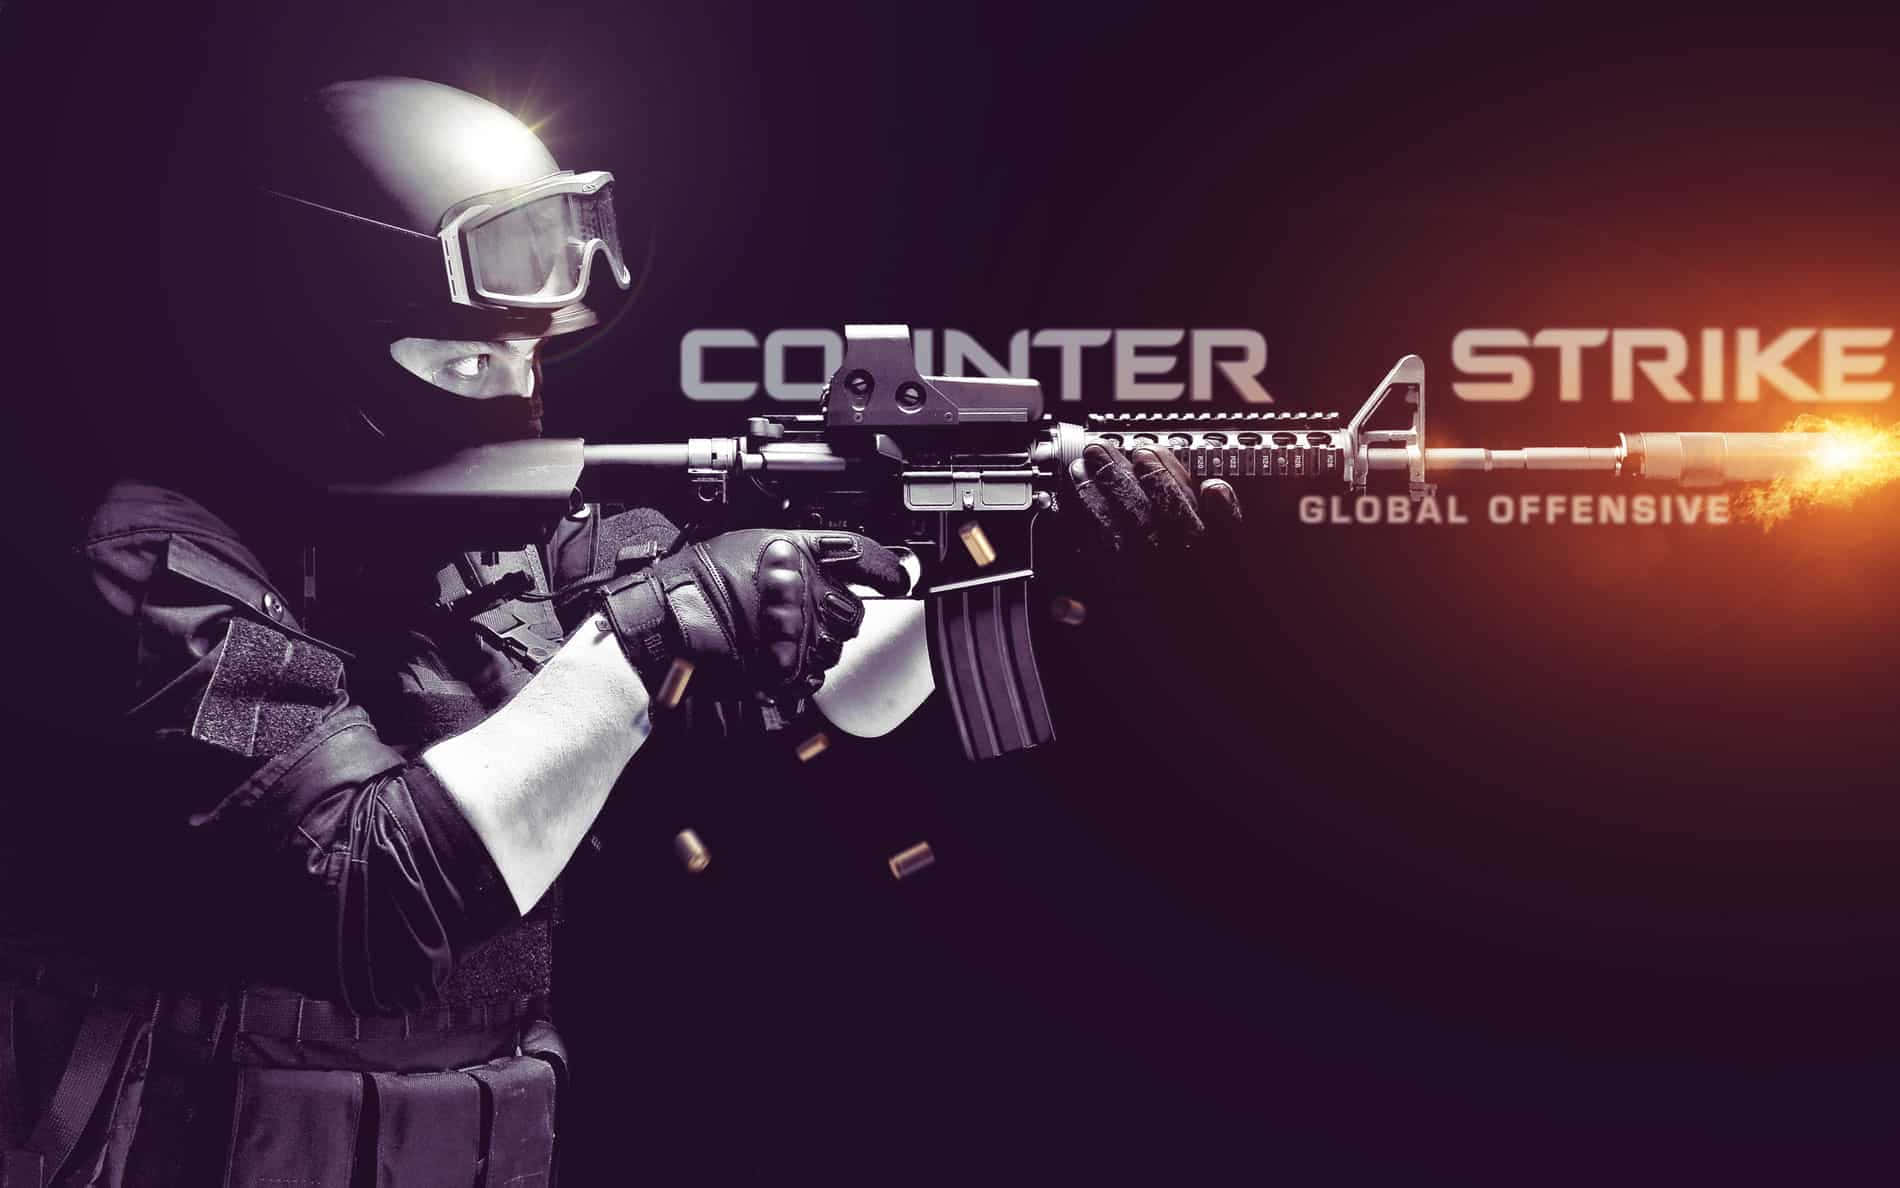 Step up your Counter-Strike: Global Offensive game with the new release